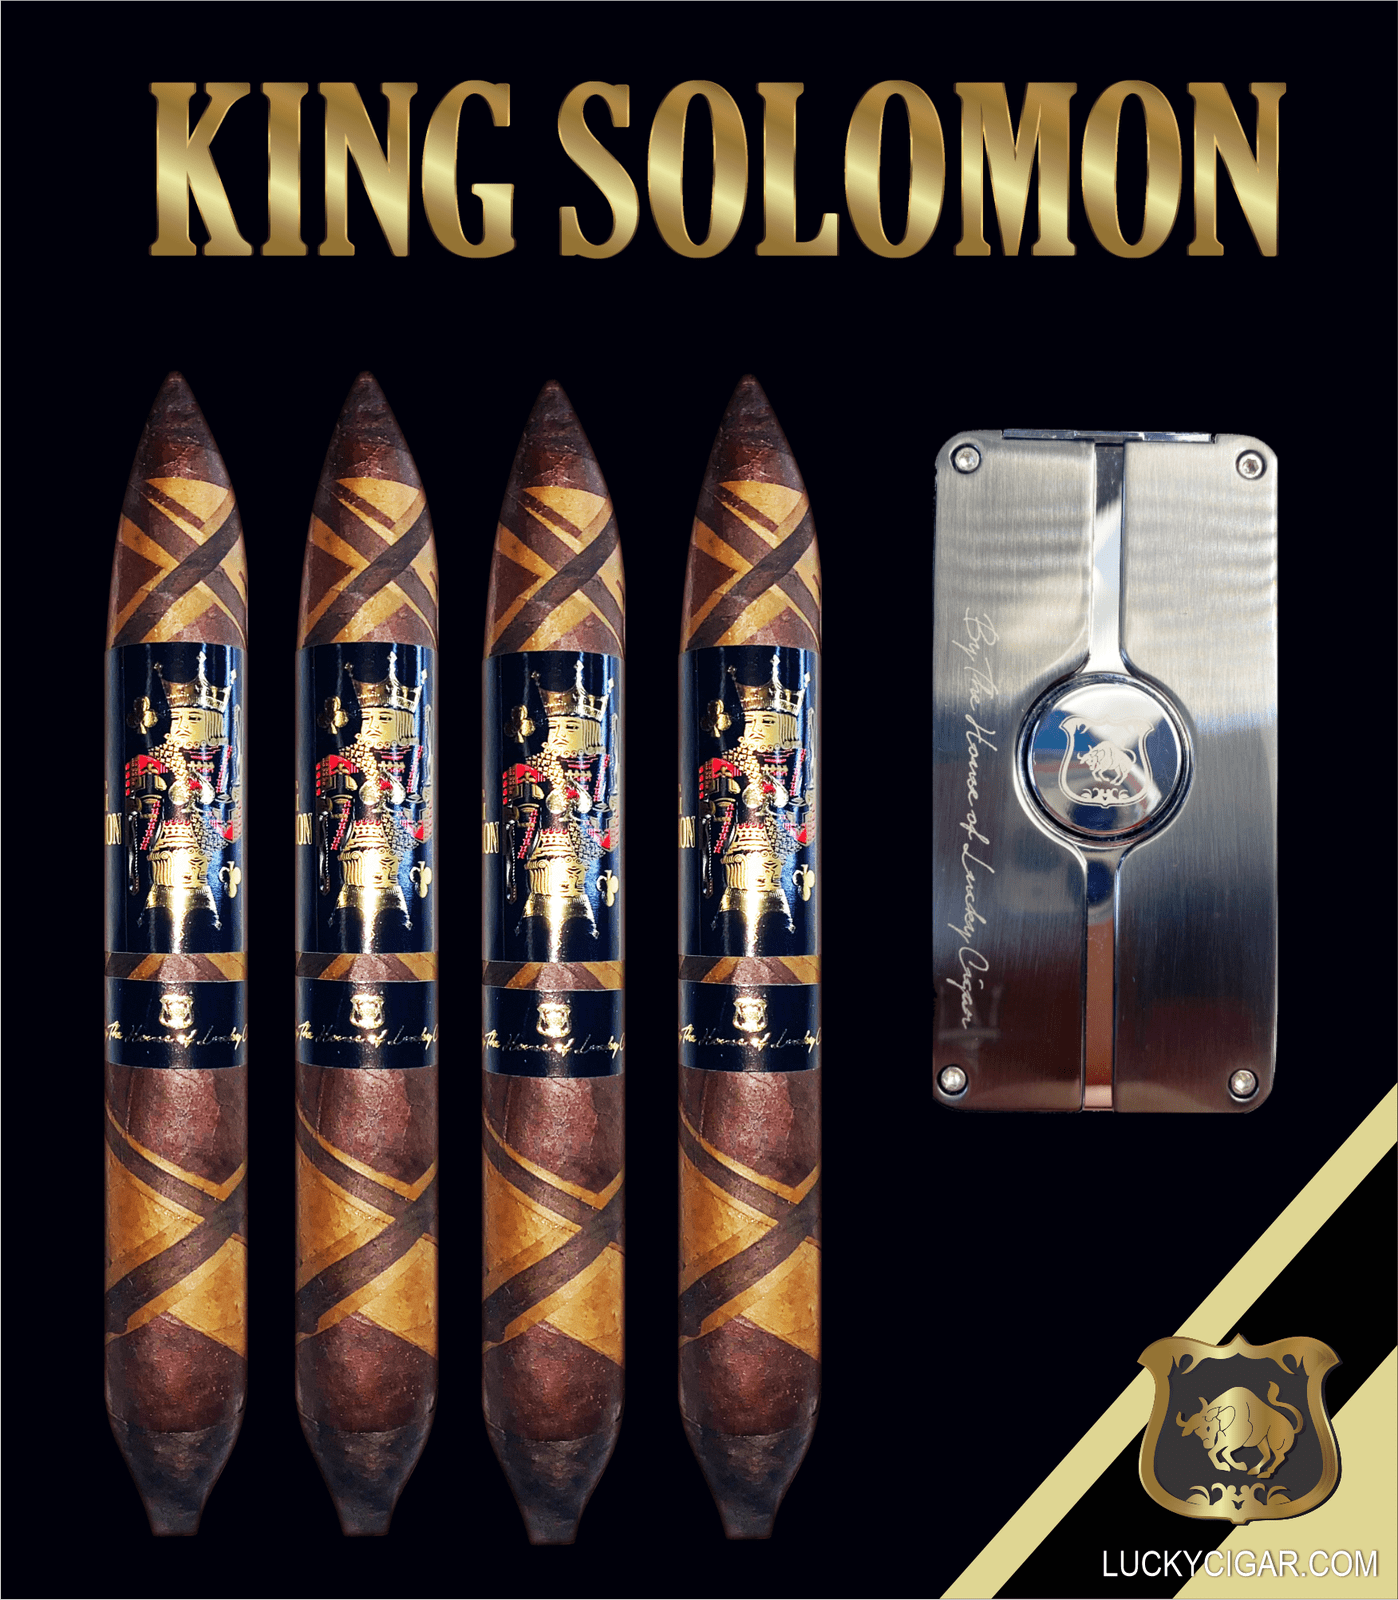 From The King Solomon Series: 4 Solomon 7x60 Cigars with Cutter Set